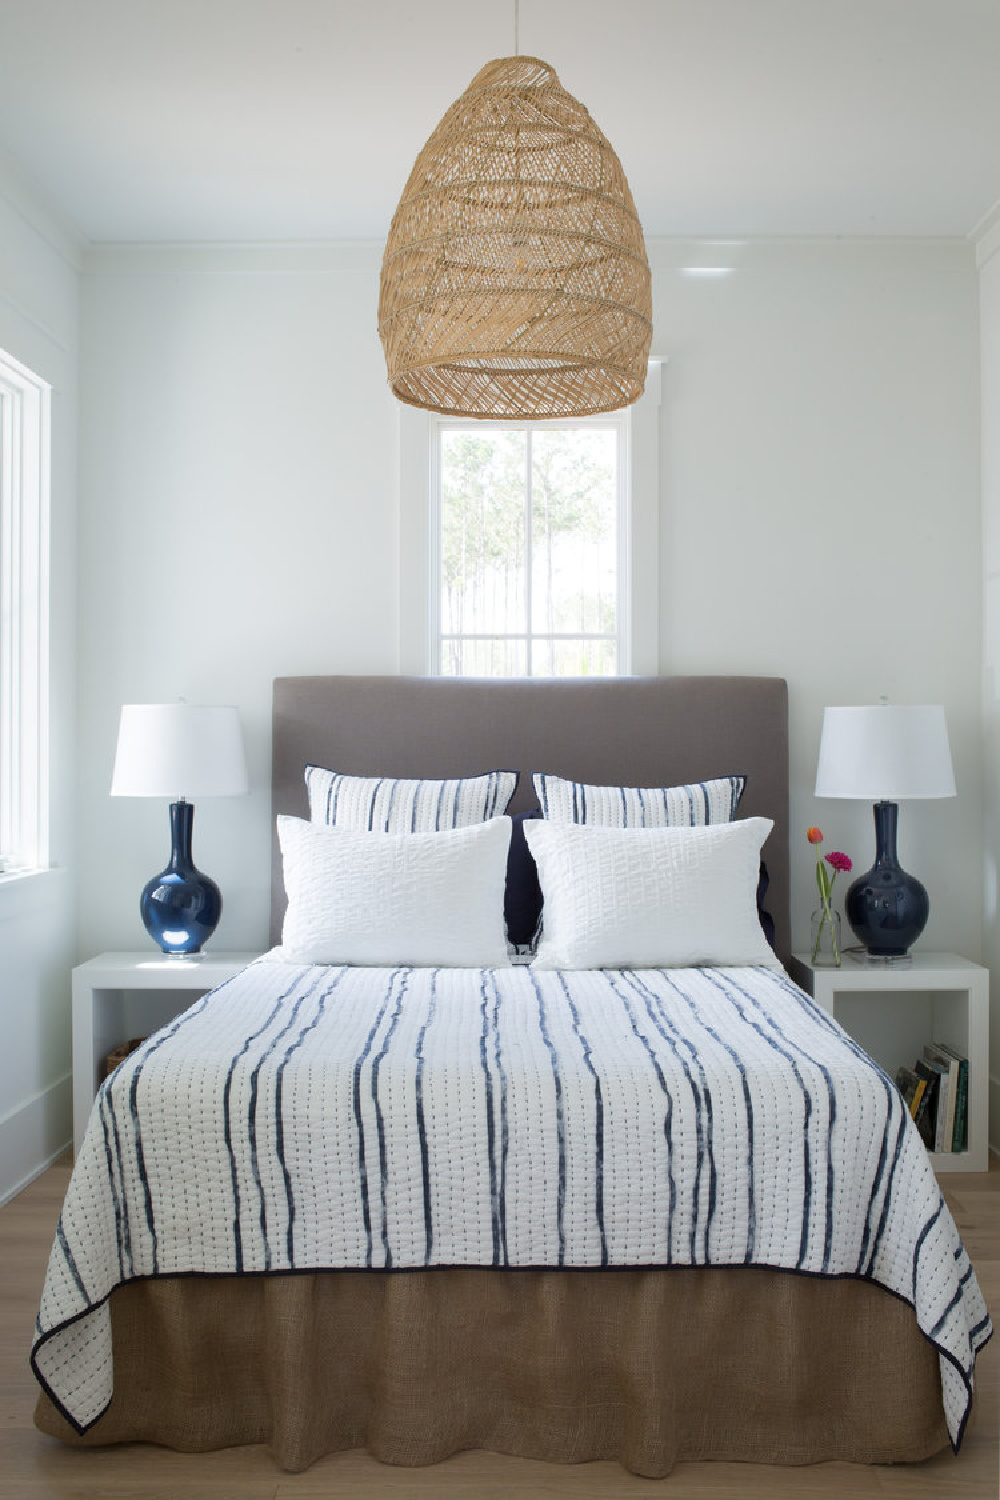 Benjamin Moore OC-151 on walls in cottage bedroom with navy blue and white. Board and batten coastal cottage in Palmetto - Lisa Furey Interiors.